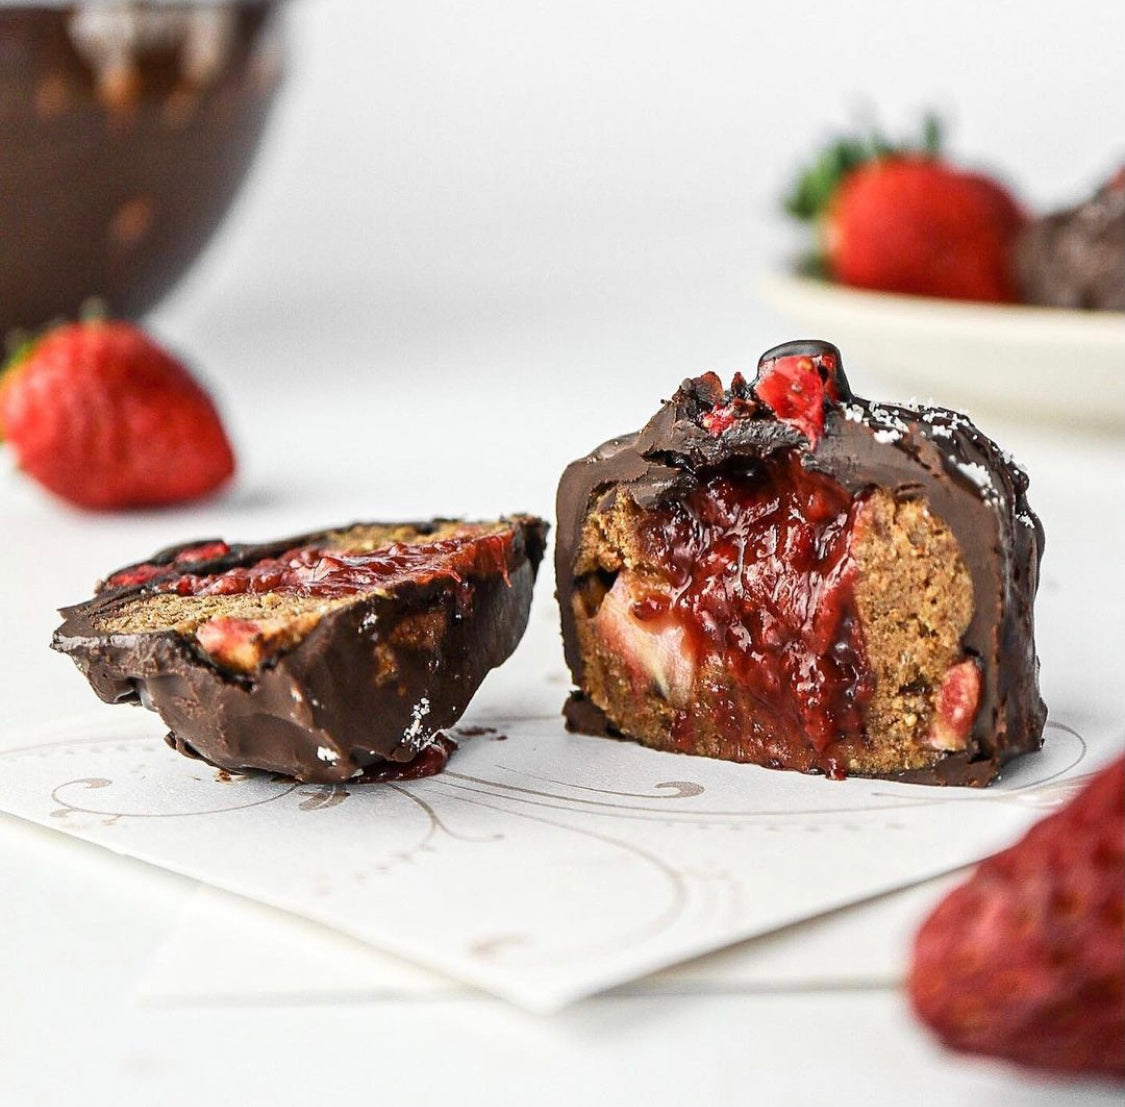 Best Seller: Chocolate Strawberry Pea Protein Truffles